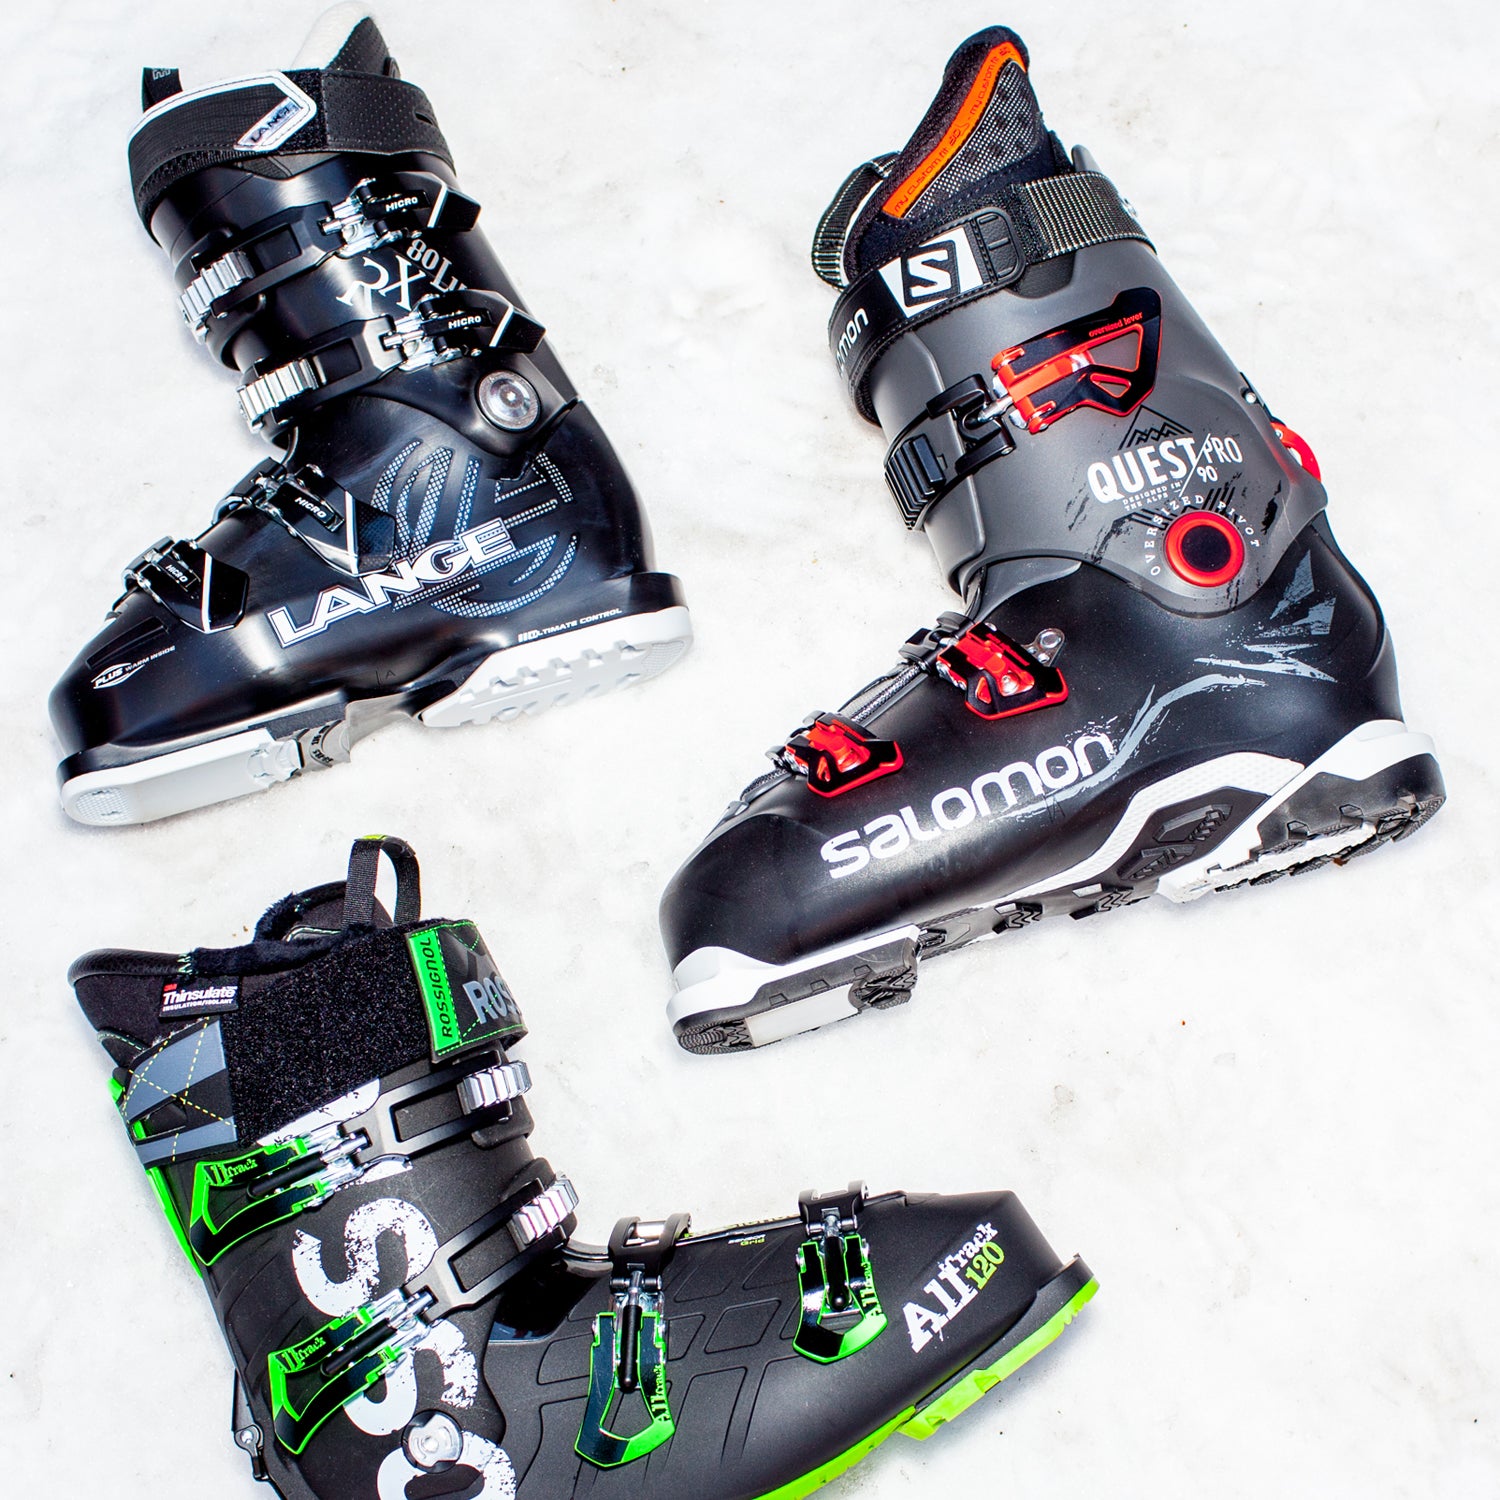 How Do I Buy My First Pair of Alpine Ski Boots?